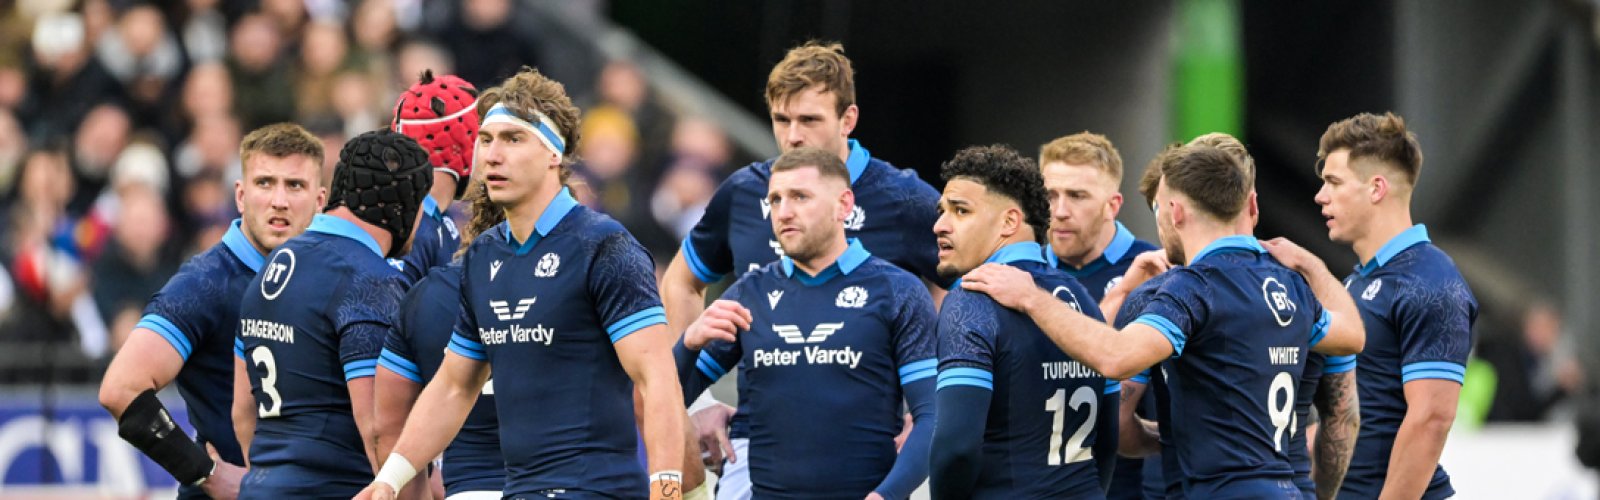 Scotland Rugby Union players